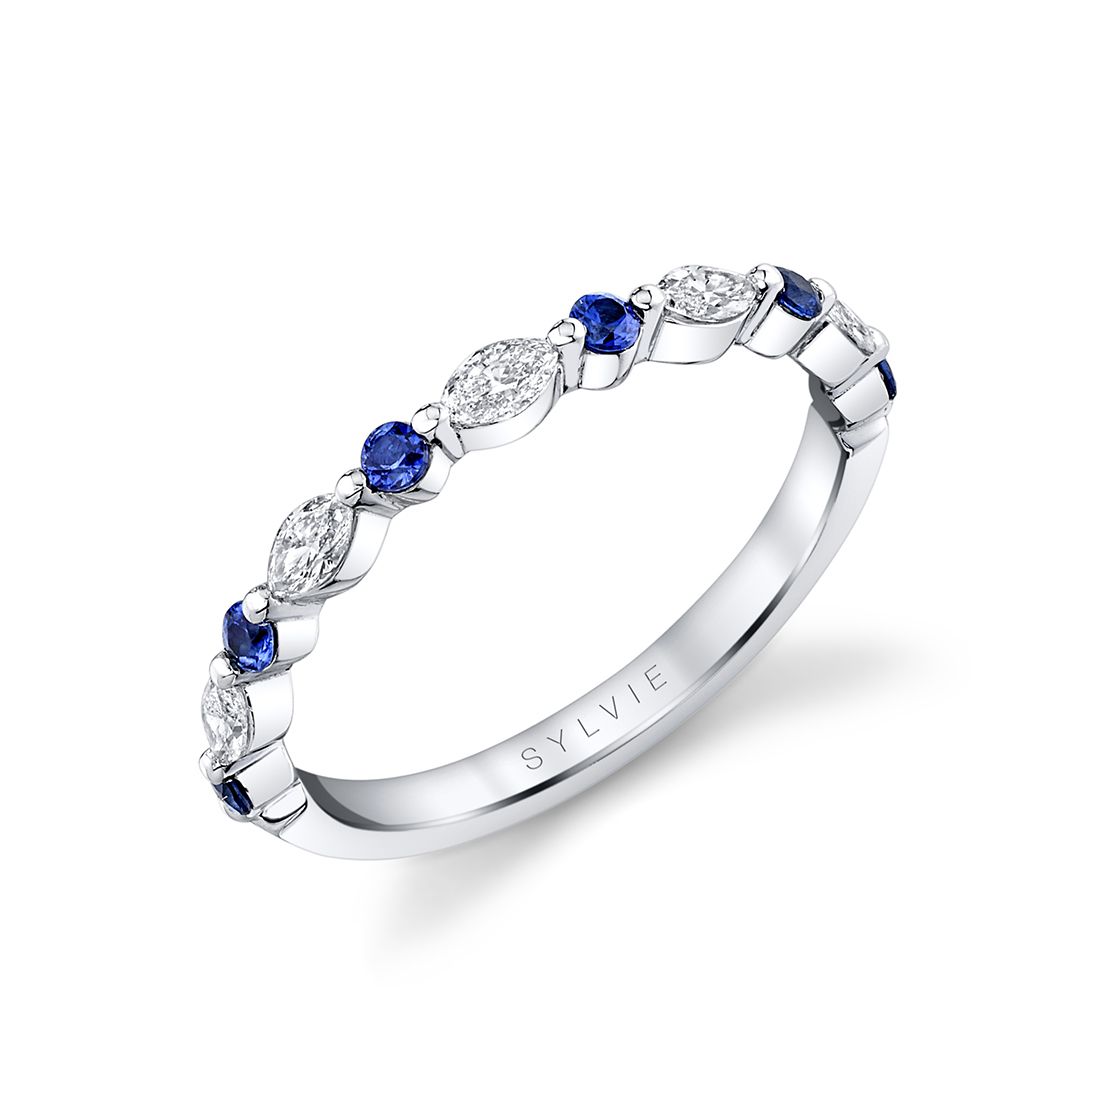 Blue Sapphire And Diamond Ring | Gemstone Wedding Bands And Rings Regarding Marquise Shape Eternity Band Rings With Round Diamonds (View 21 of 25)